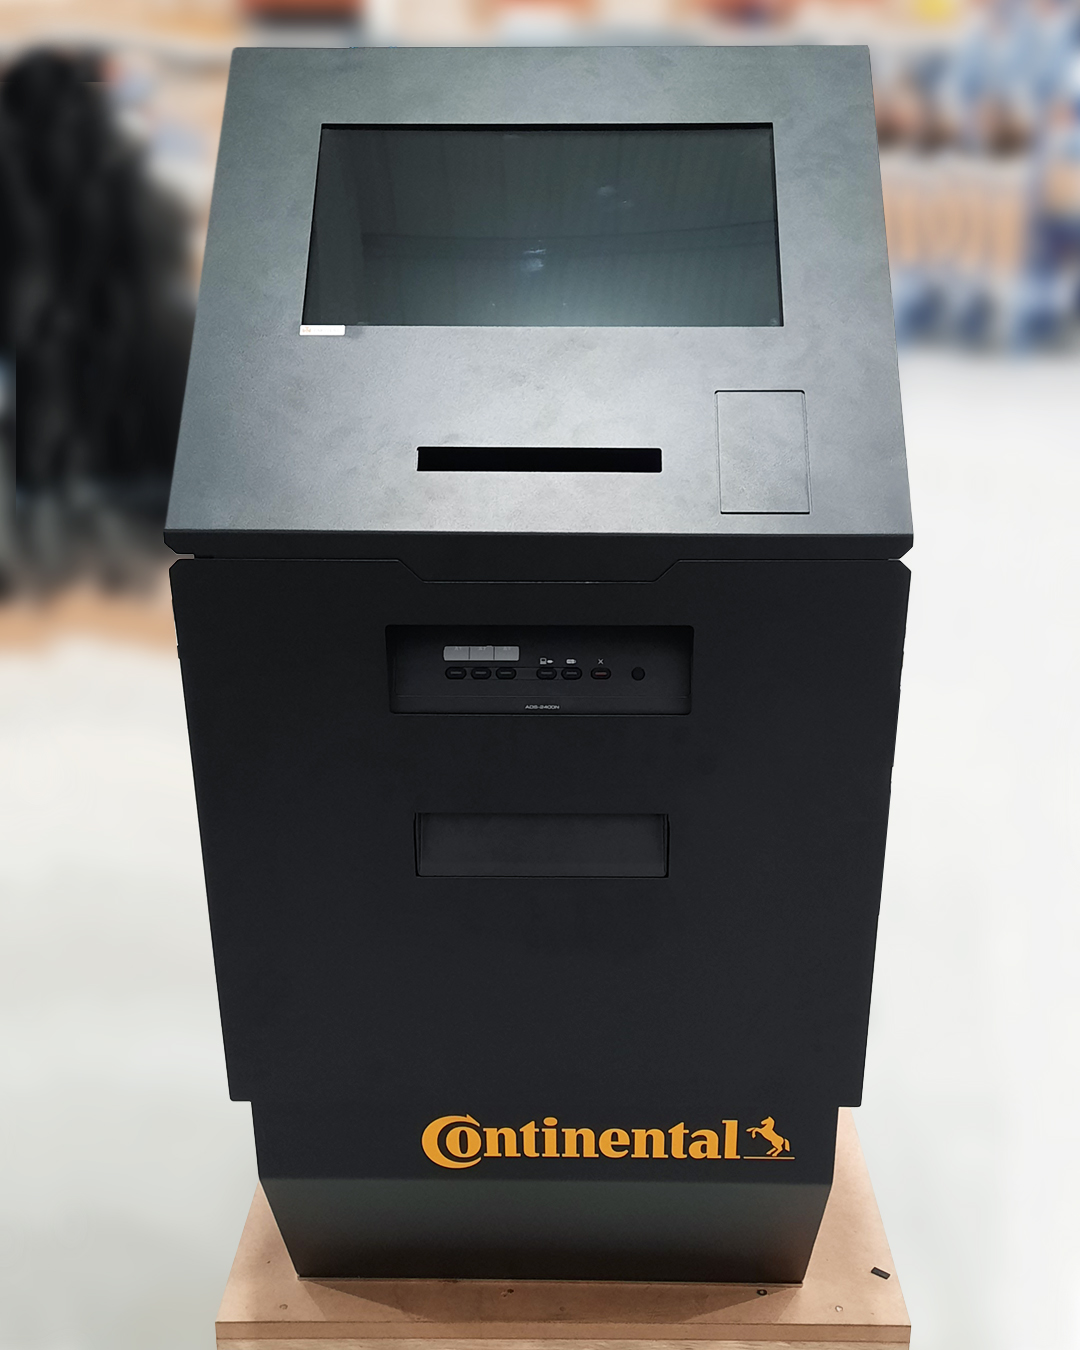 Continental innovates communication with its employees through self-service kiosks from PARTTEAM & OEMKIOSKS